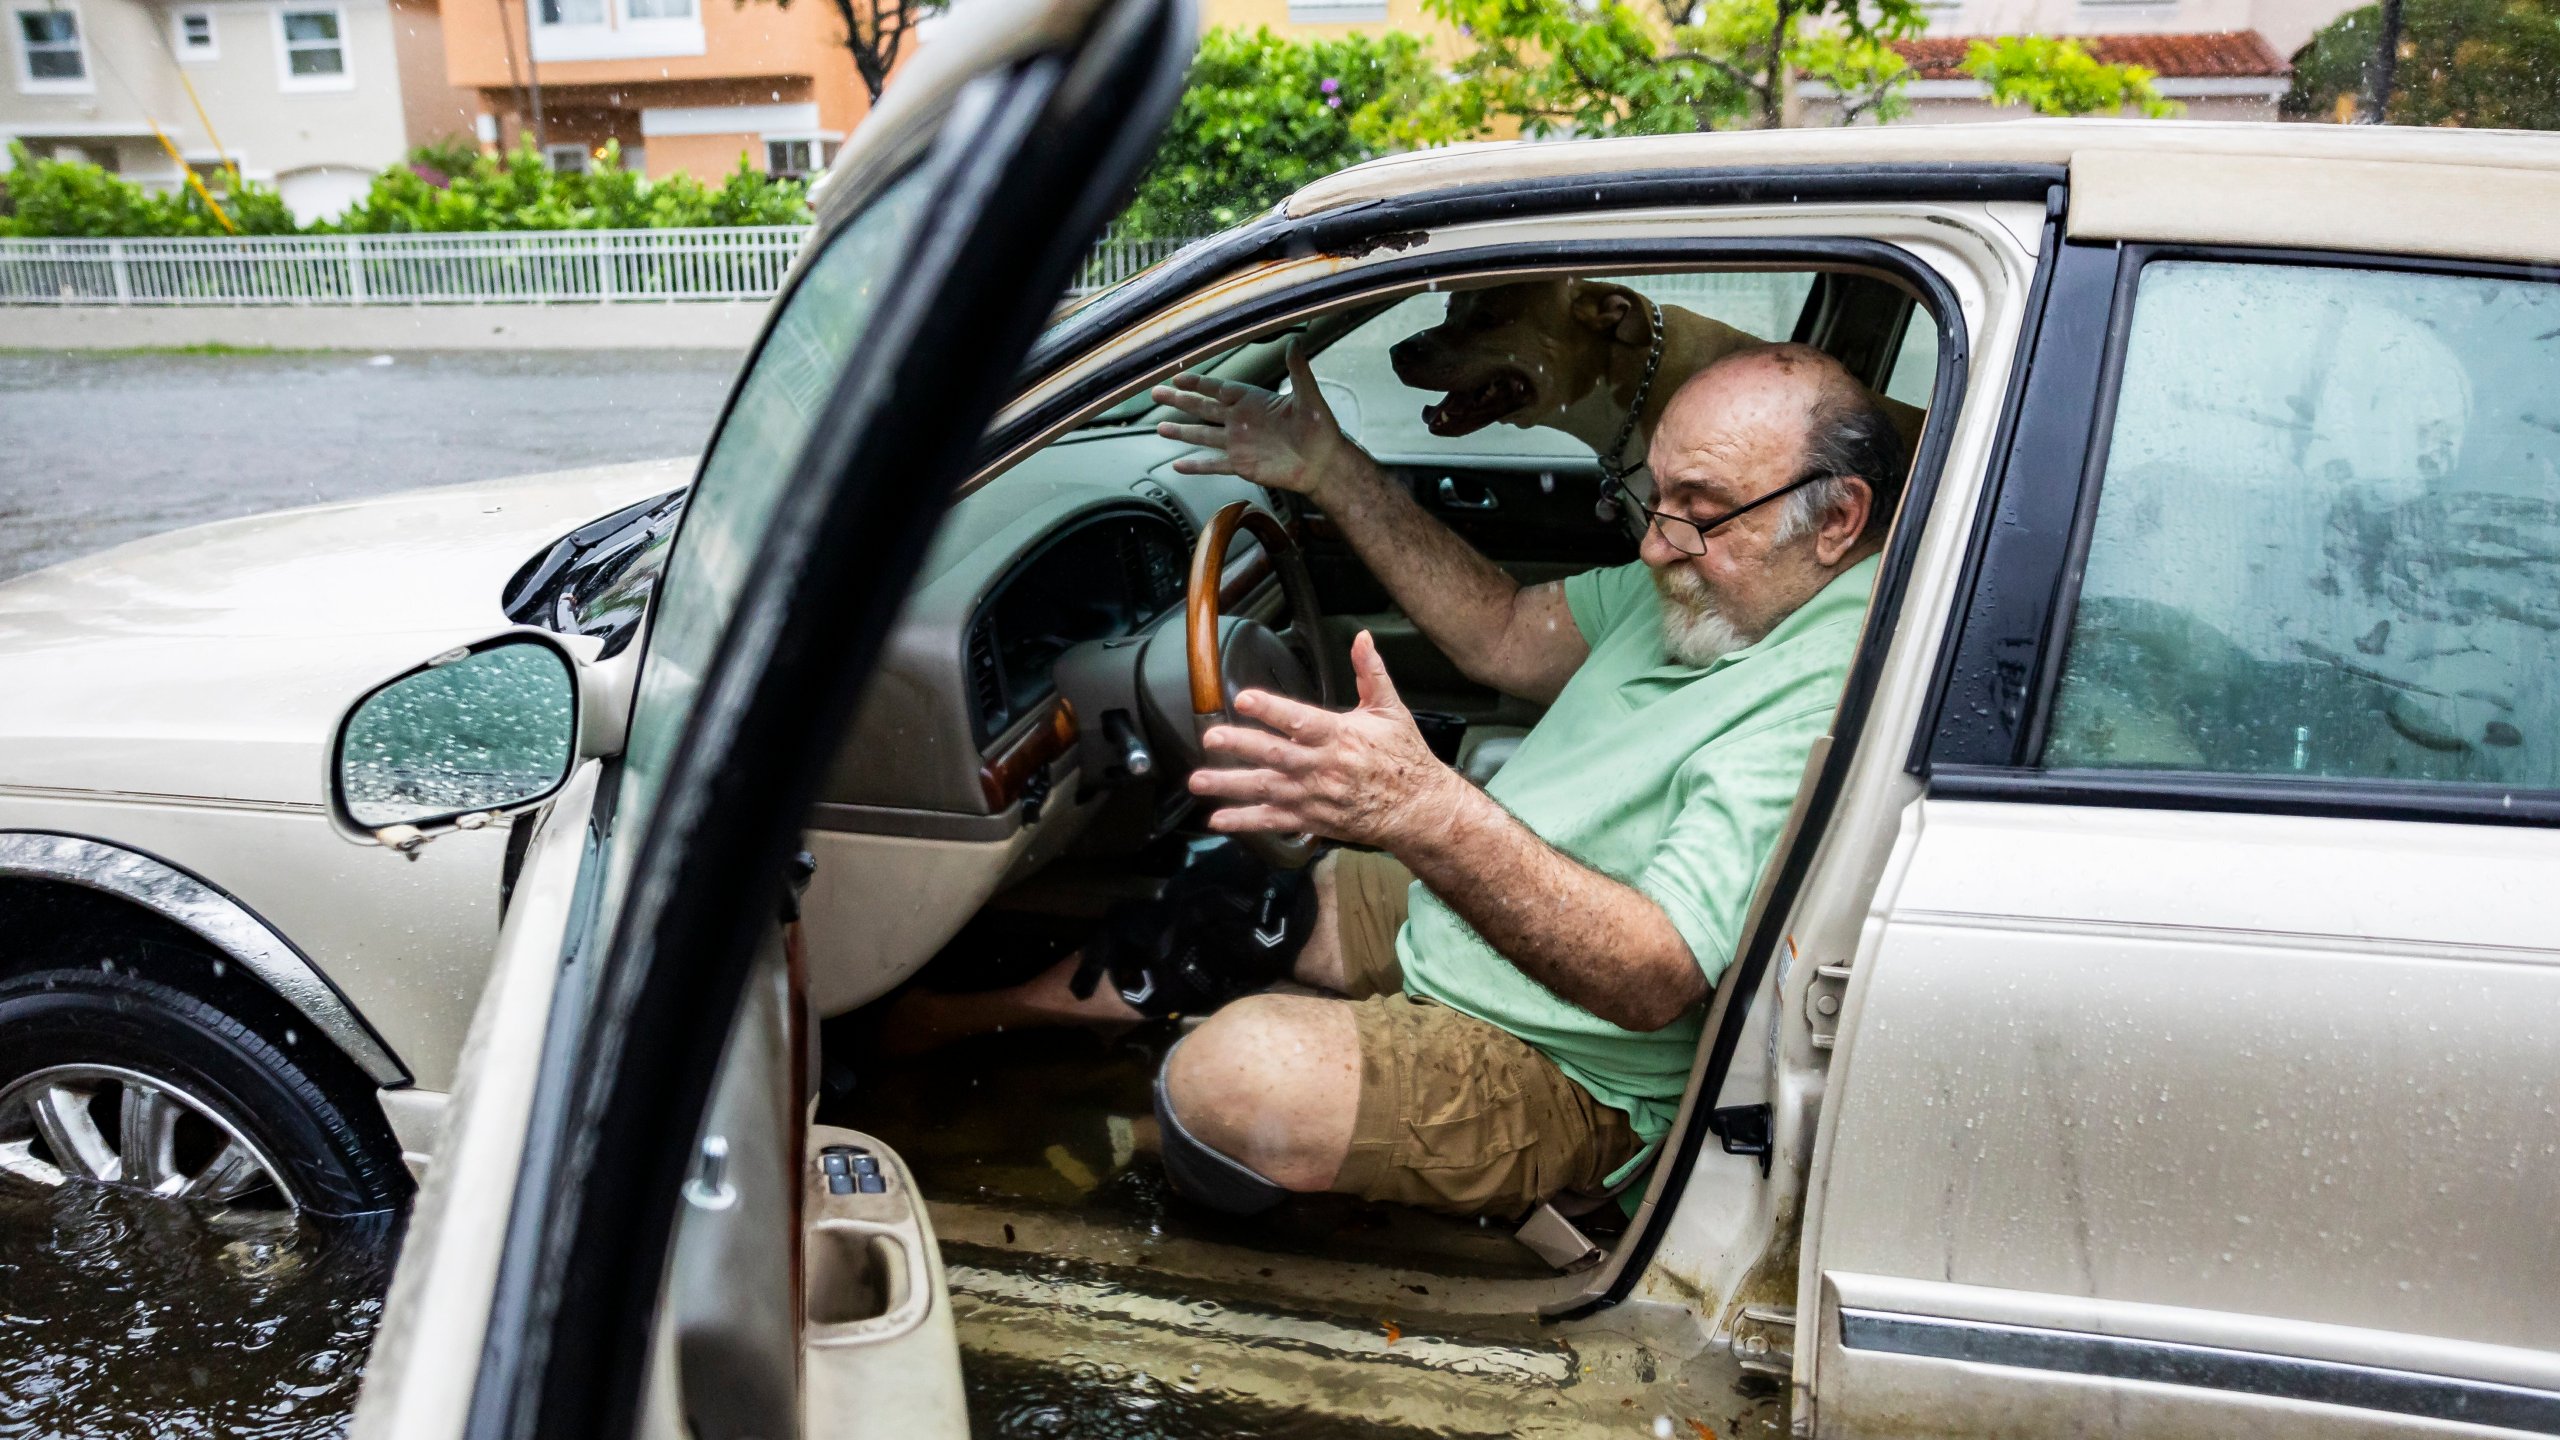 FILE - Mike Viesel and his dog Humi, wait in his flooded car for a tow, June 12, 2024, in Hollywood, Fla. Unlike previous hurricane seasons, this summer brings record hot temperatures nationwide and an early onset of storms. Hurricane season runs June 1 to Nov. 30, but usually the months where most hurricanes have occurred are September and October, said Jaime Hernandez, the emergency management director for Hollywood, on Florida's Atlantic Coast. (Matias J. Ocner/Miami Herald via AP, File)